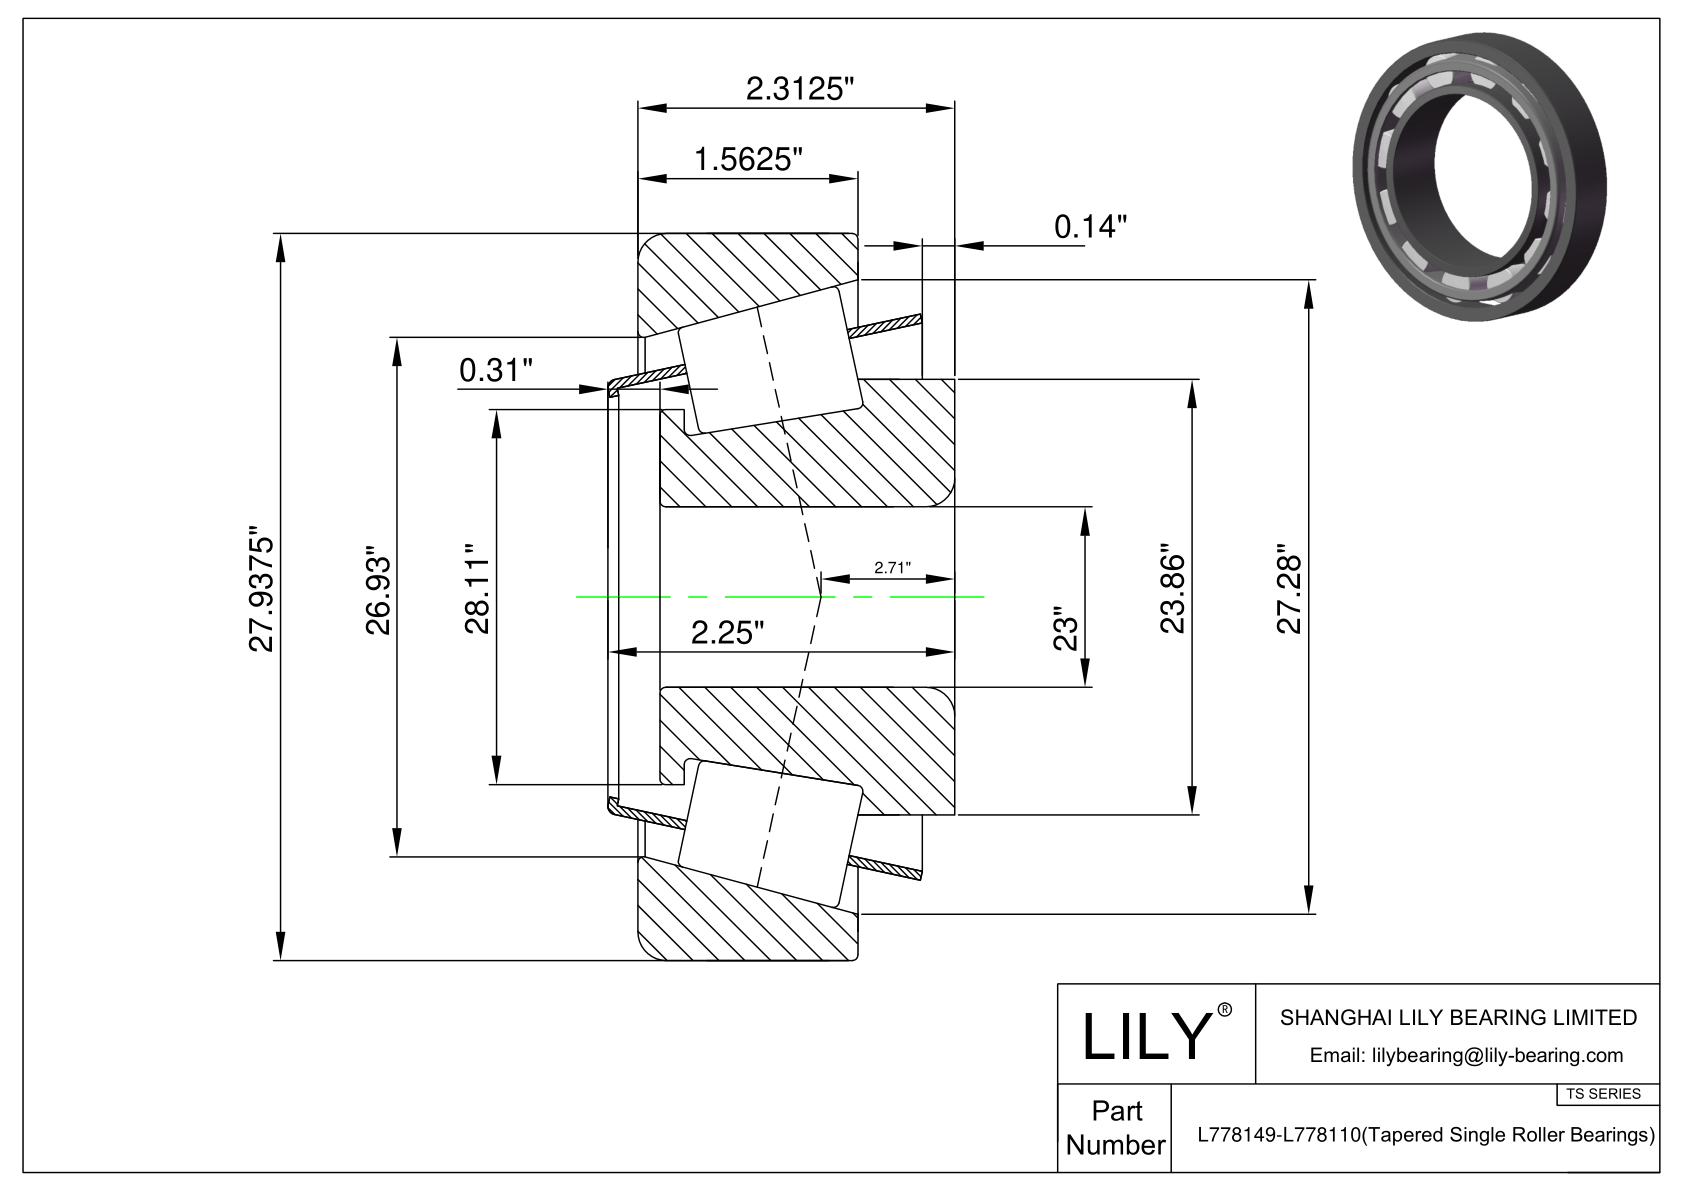 L778149-L778110 TS (Tapered Single Roller Bearings) (Imperial) cad drawing